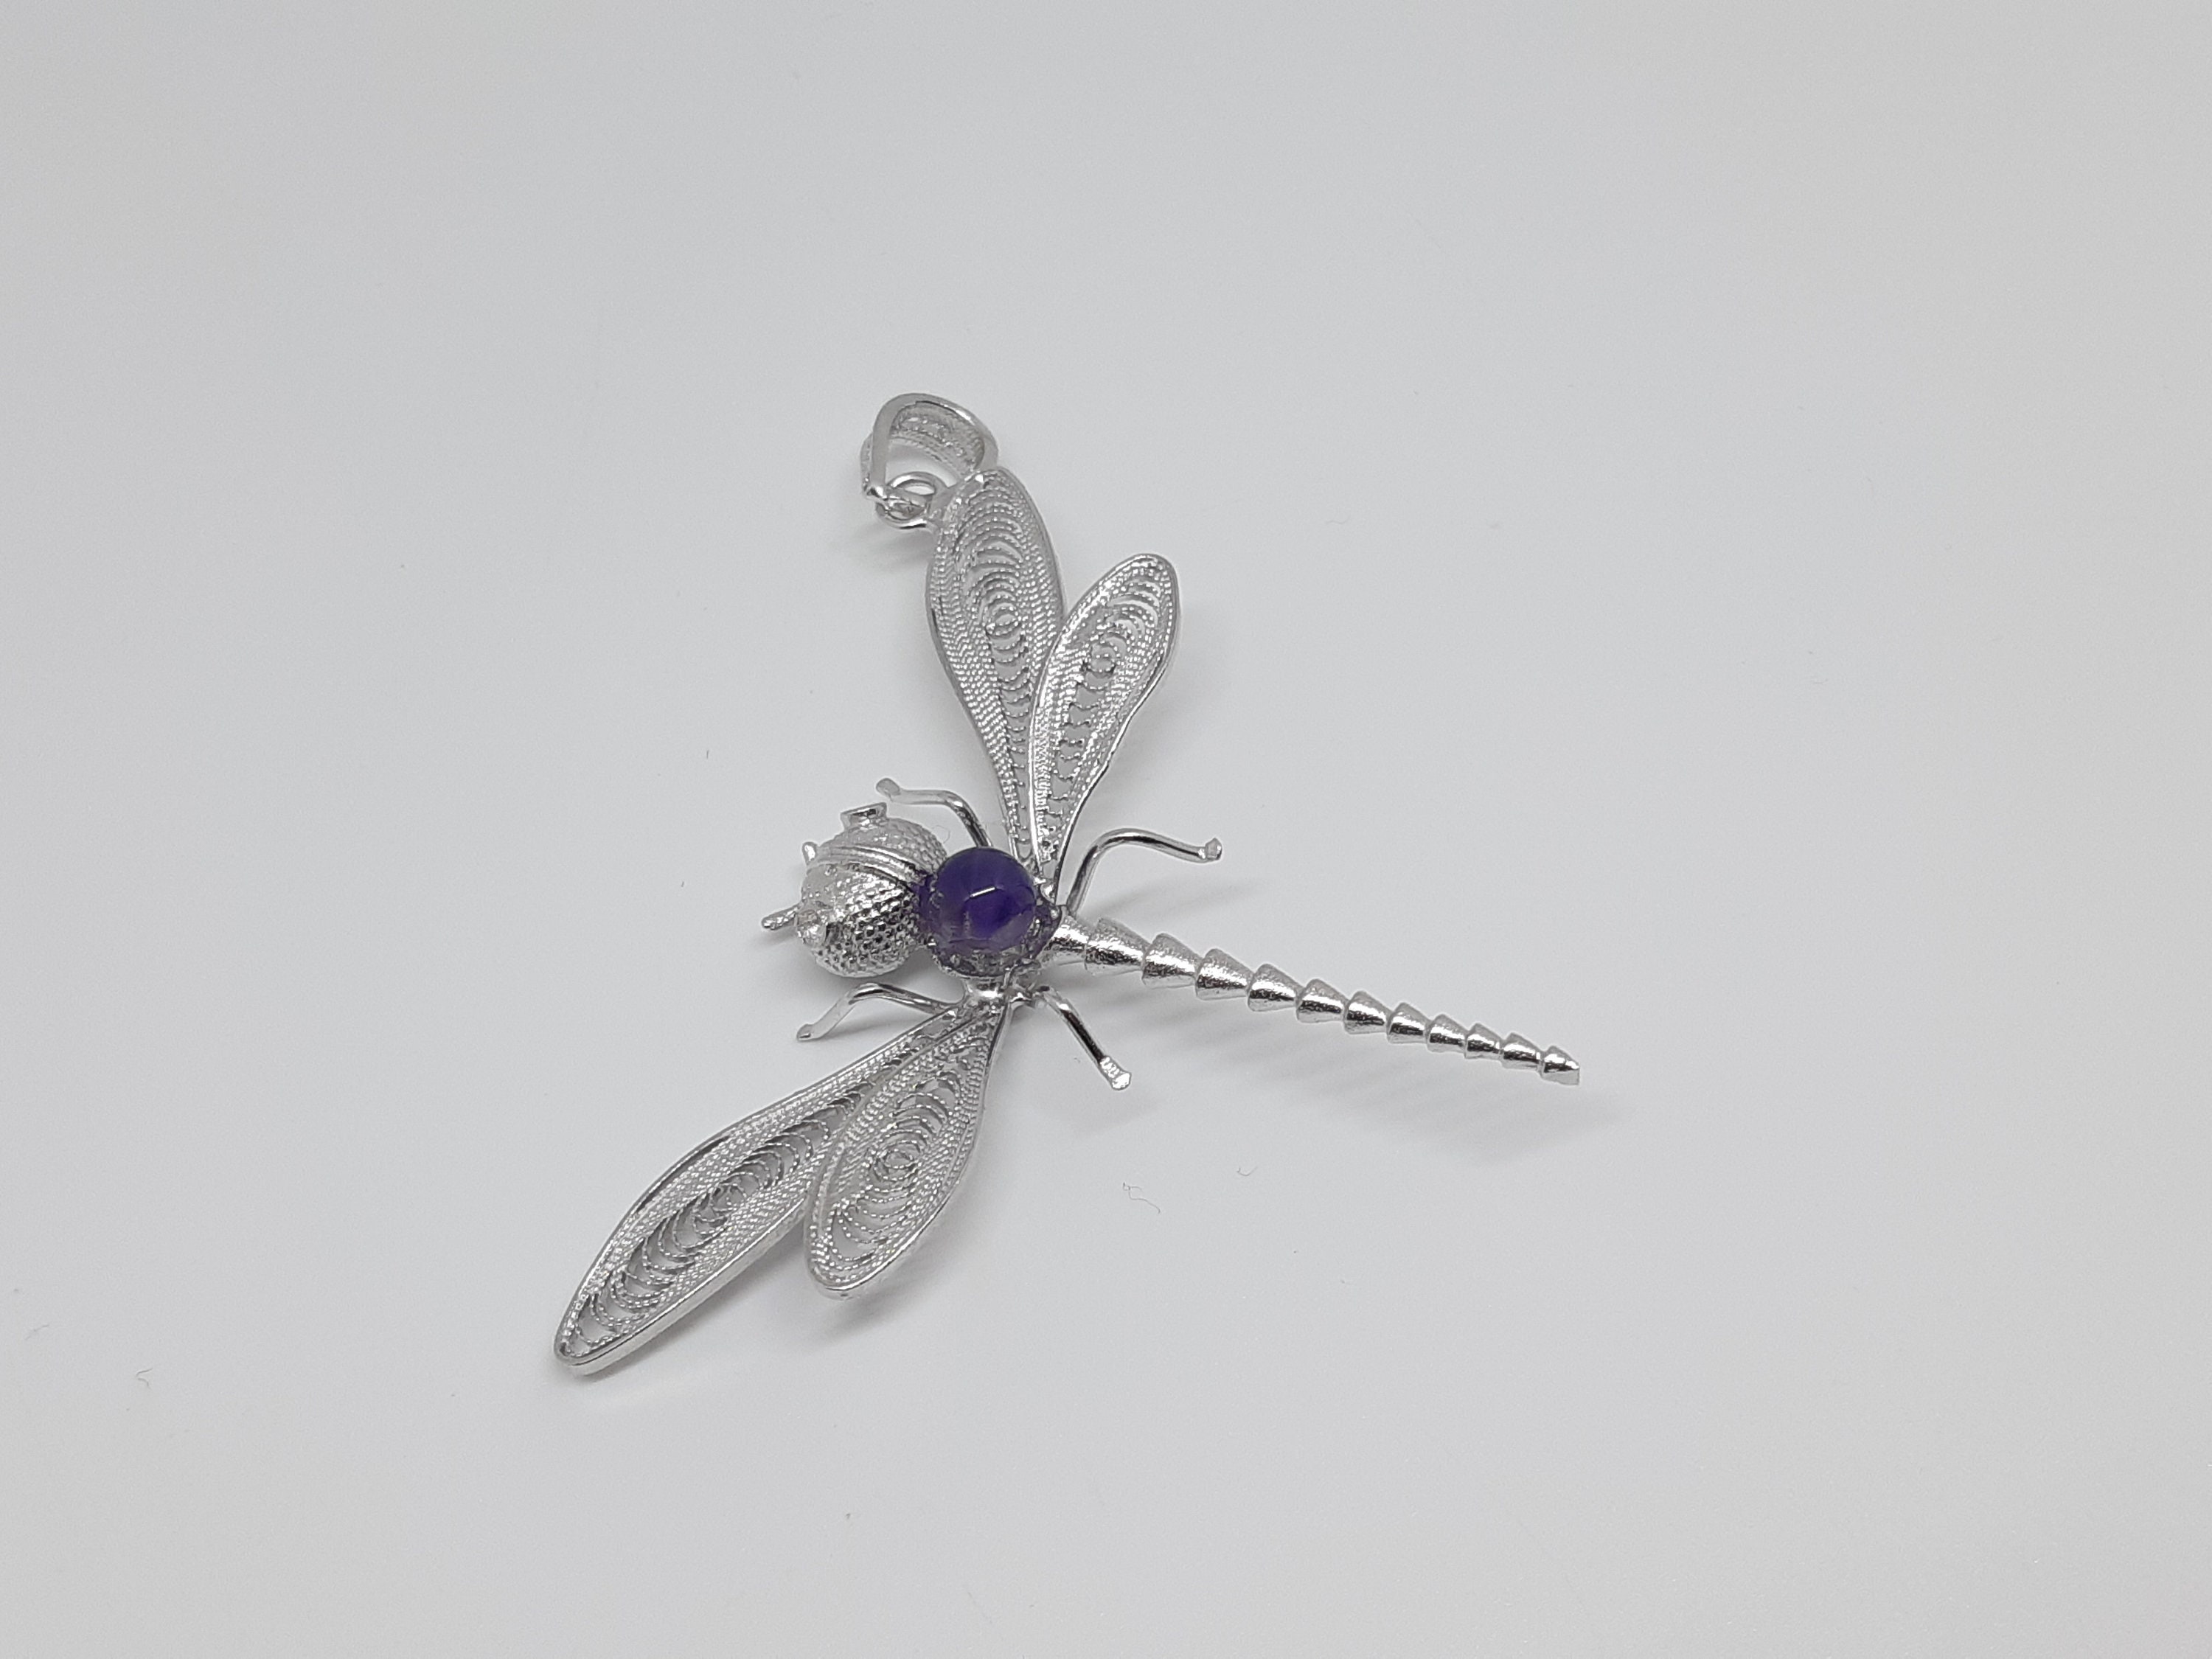 Rhododended dragonfly with amethyst Silver watermark pendant | Etsy